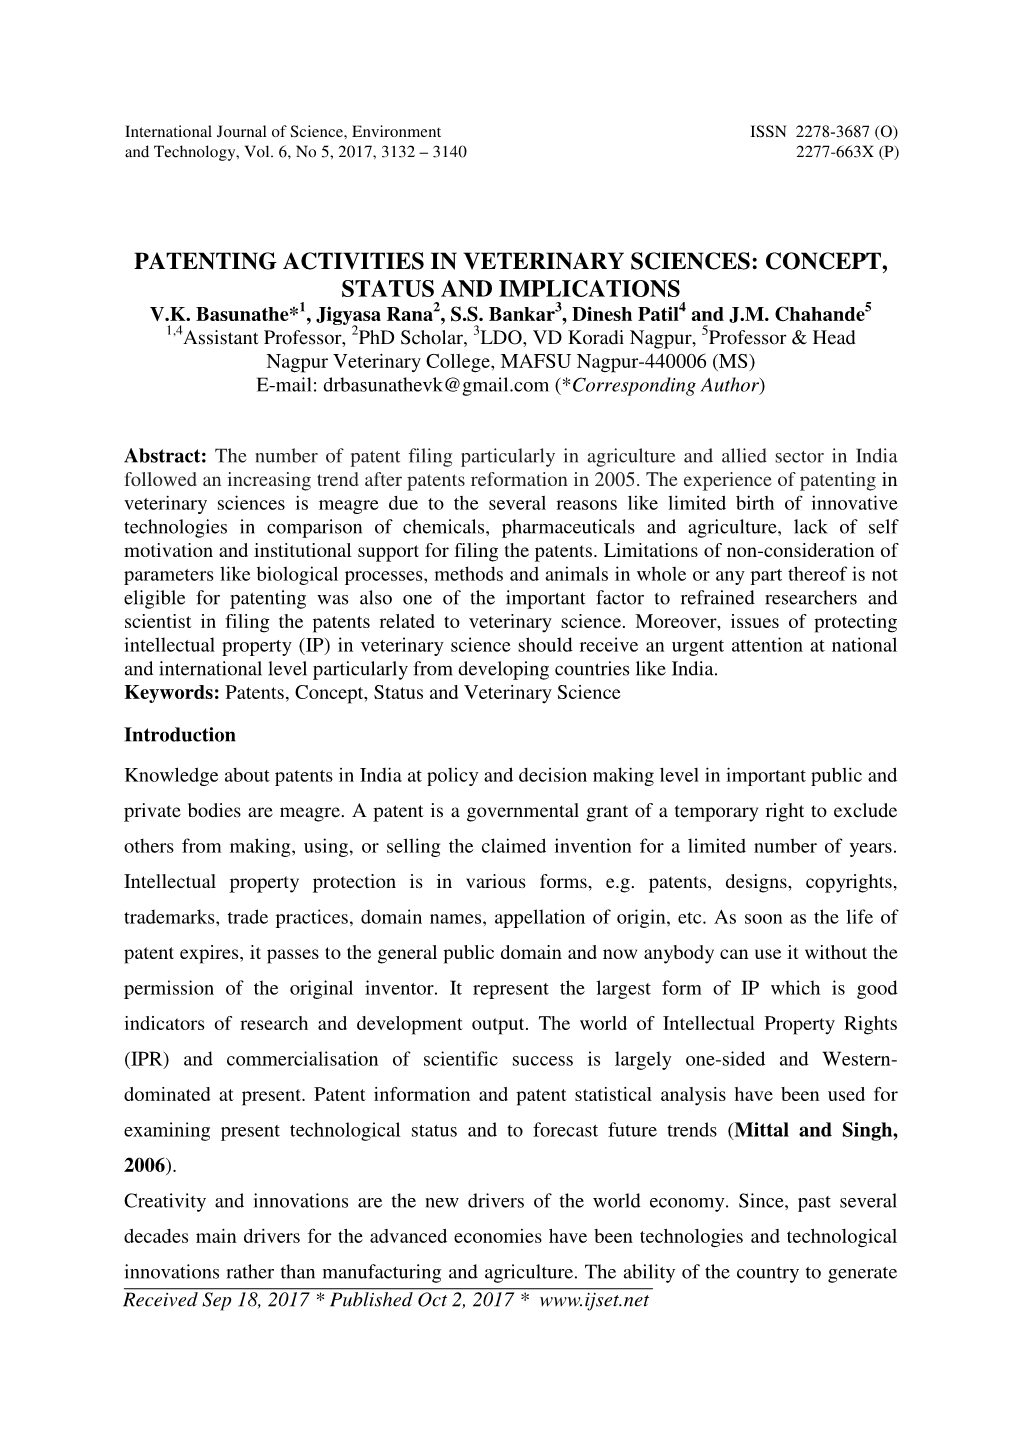 Patenting Activities in Veterinary Sciences: Concept, Status and Implications V.K